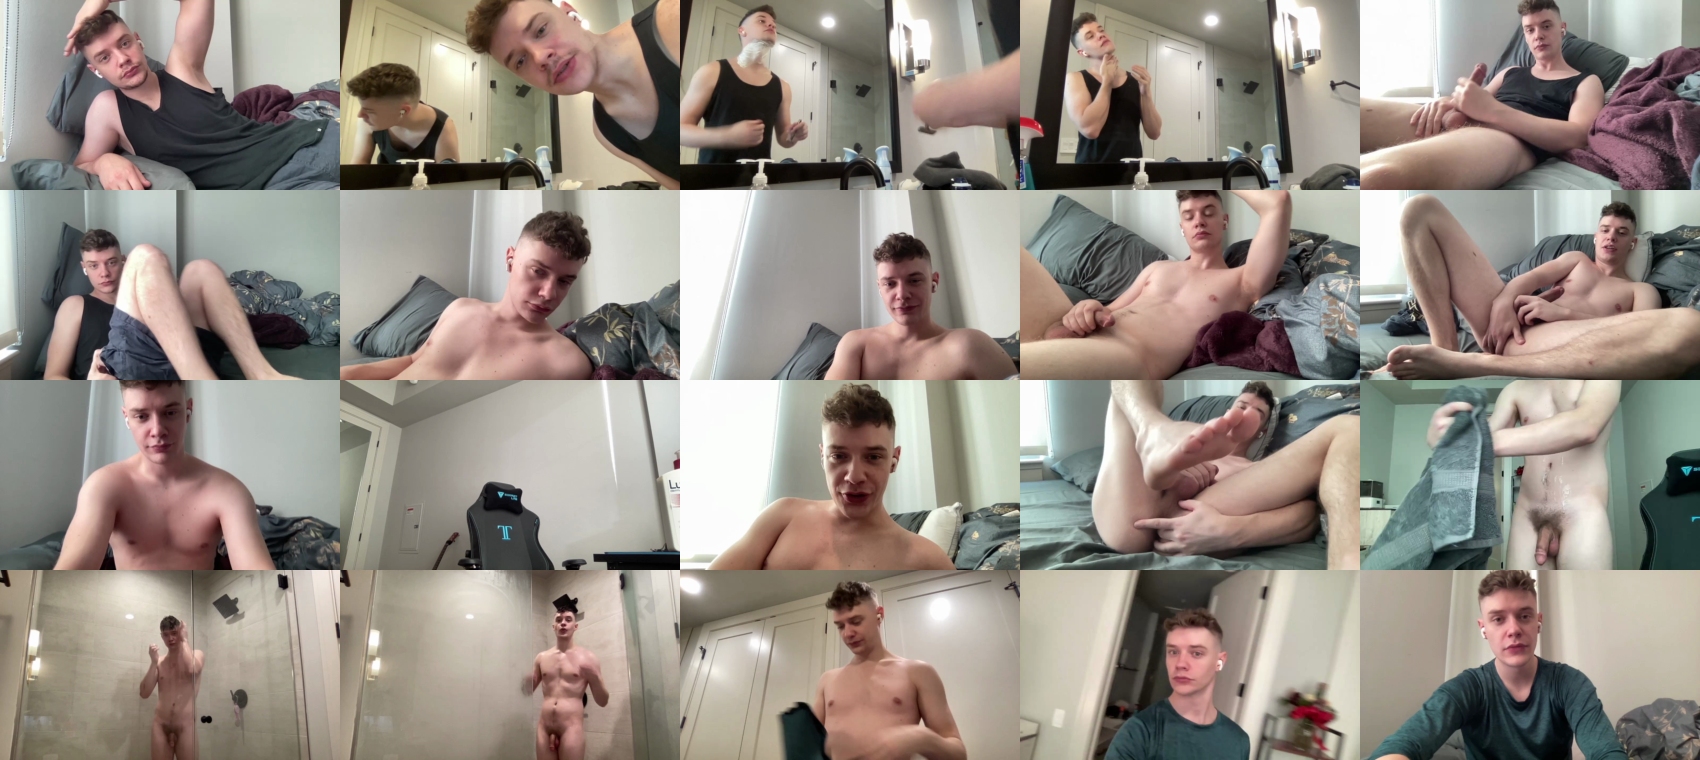 ironthud wank CAM SHOW @ Chaturbate 09-01-2022